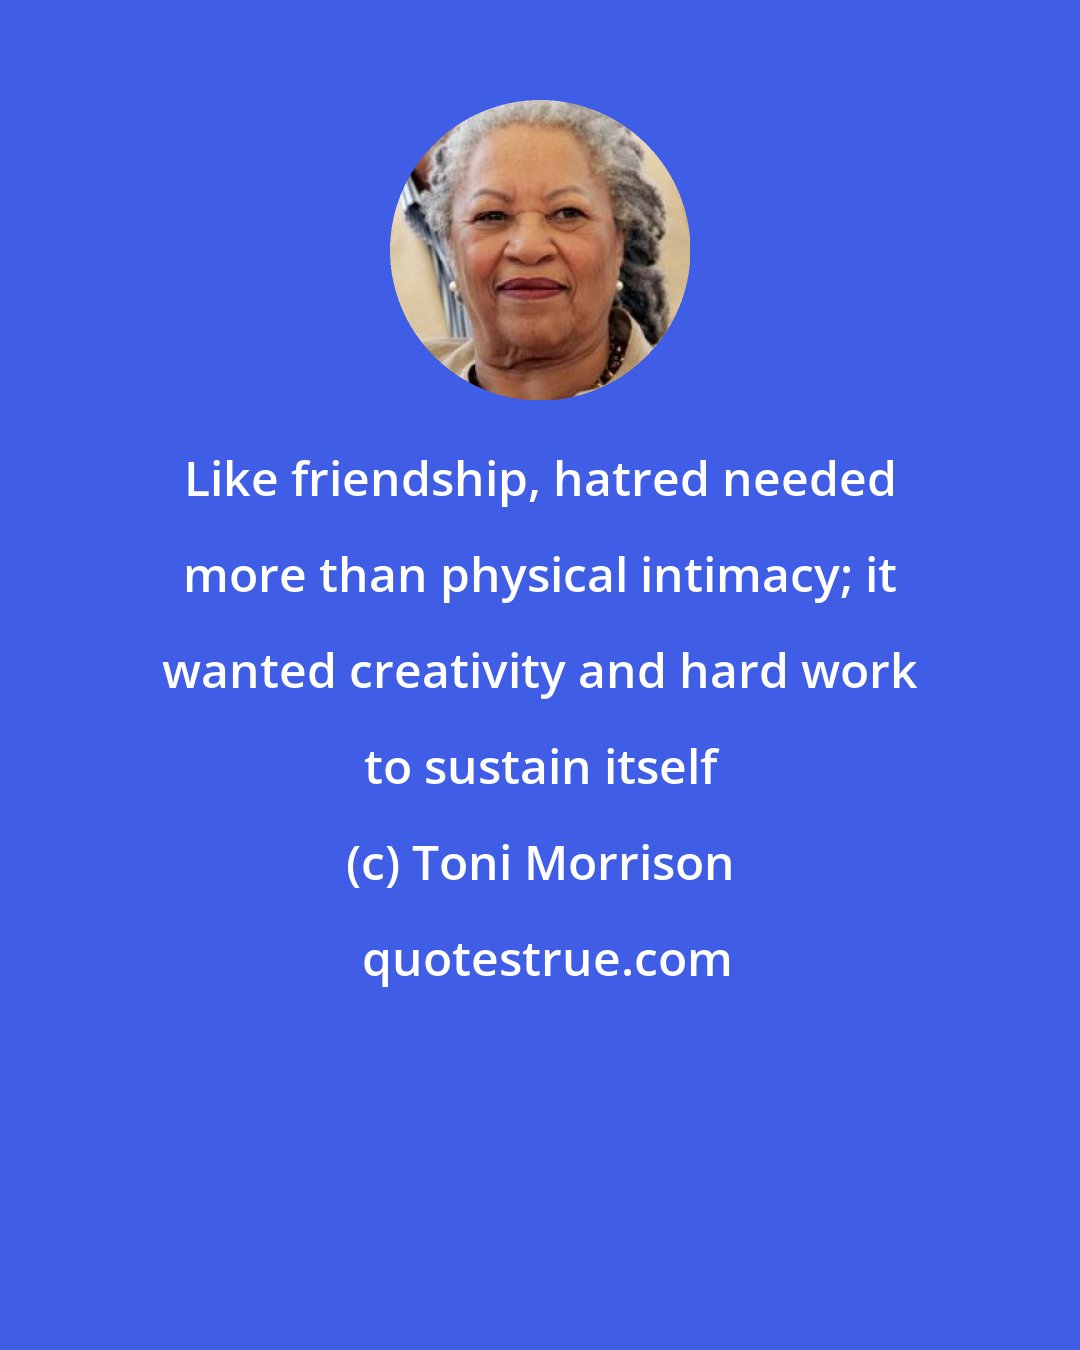 Toni Morrison: Like friendship, hatred needed more than physical intimacy; it wanted creativity and hard work to sustain itself